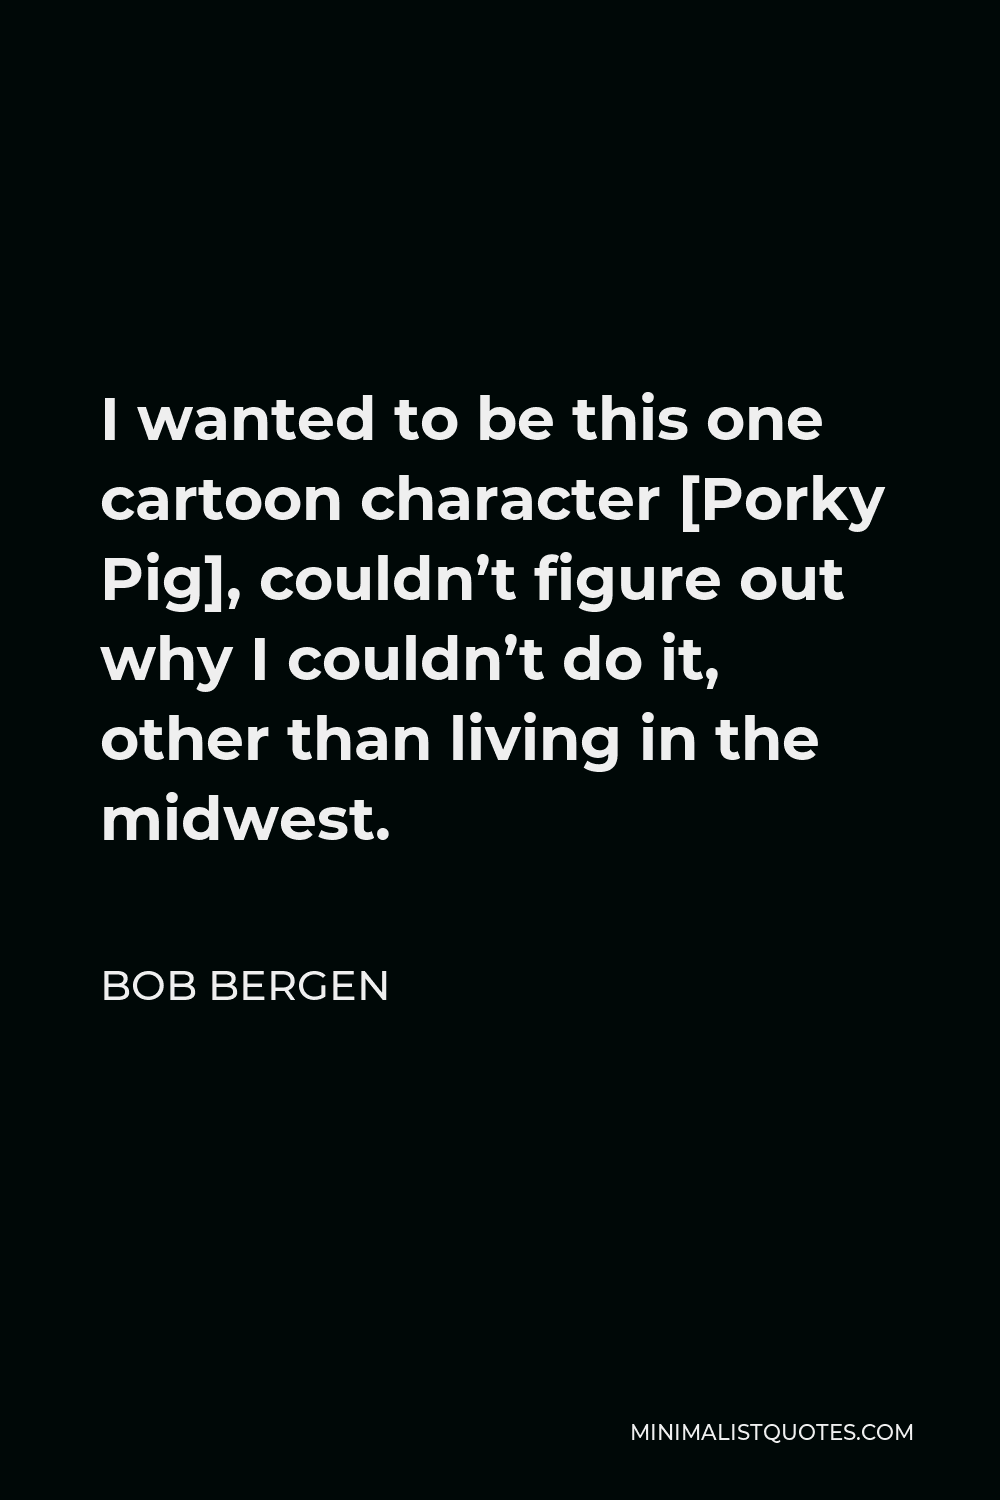 Bob Bergen Quote - I wanted to be this one cartoon character [Porky Pig], couldn’t figure out why I couldn’t do it, other than living in the midwest.